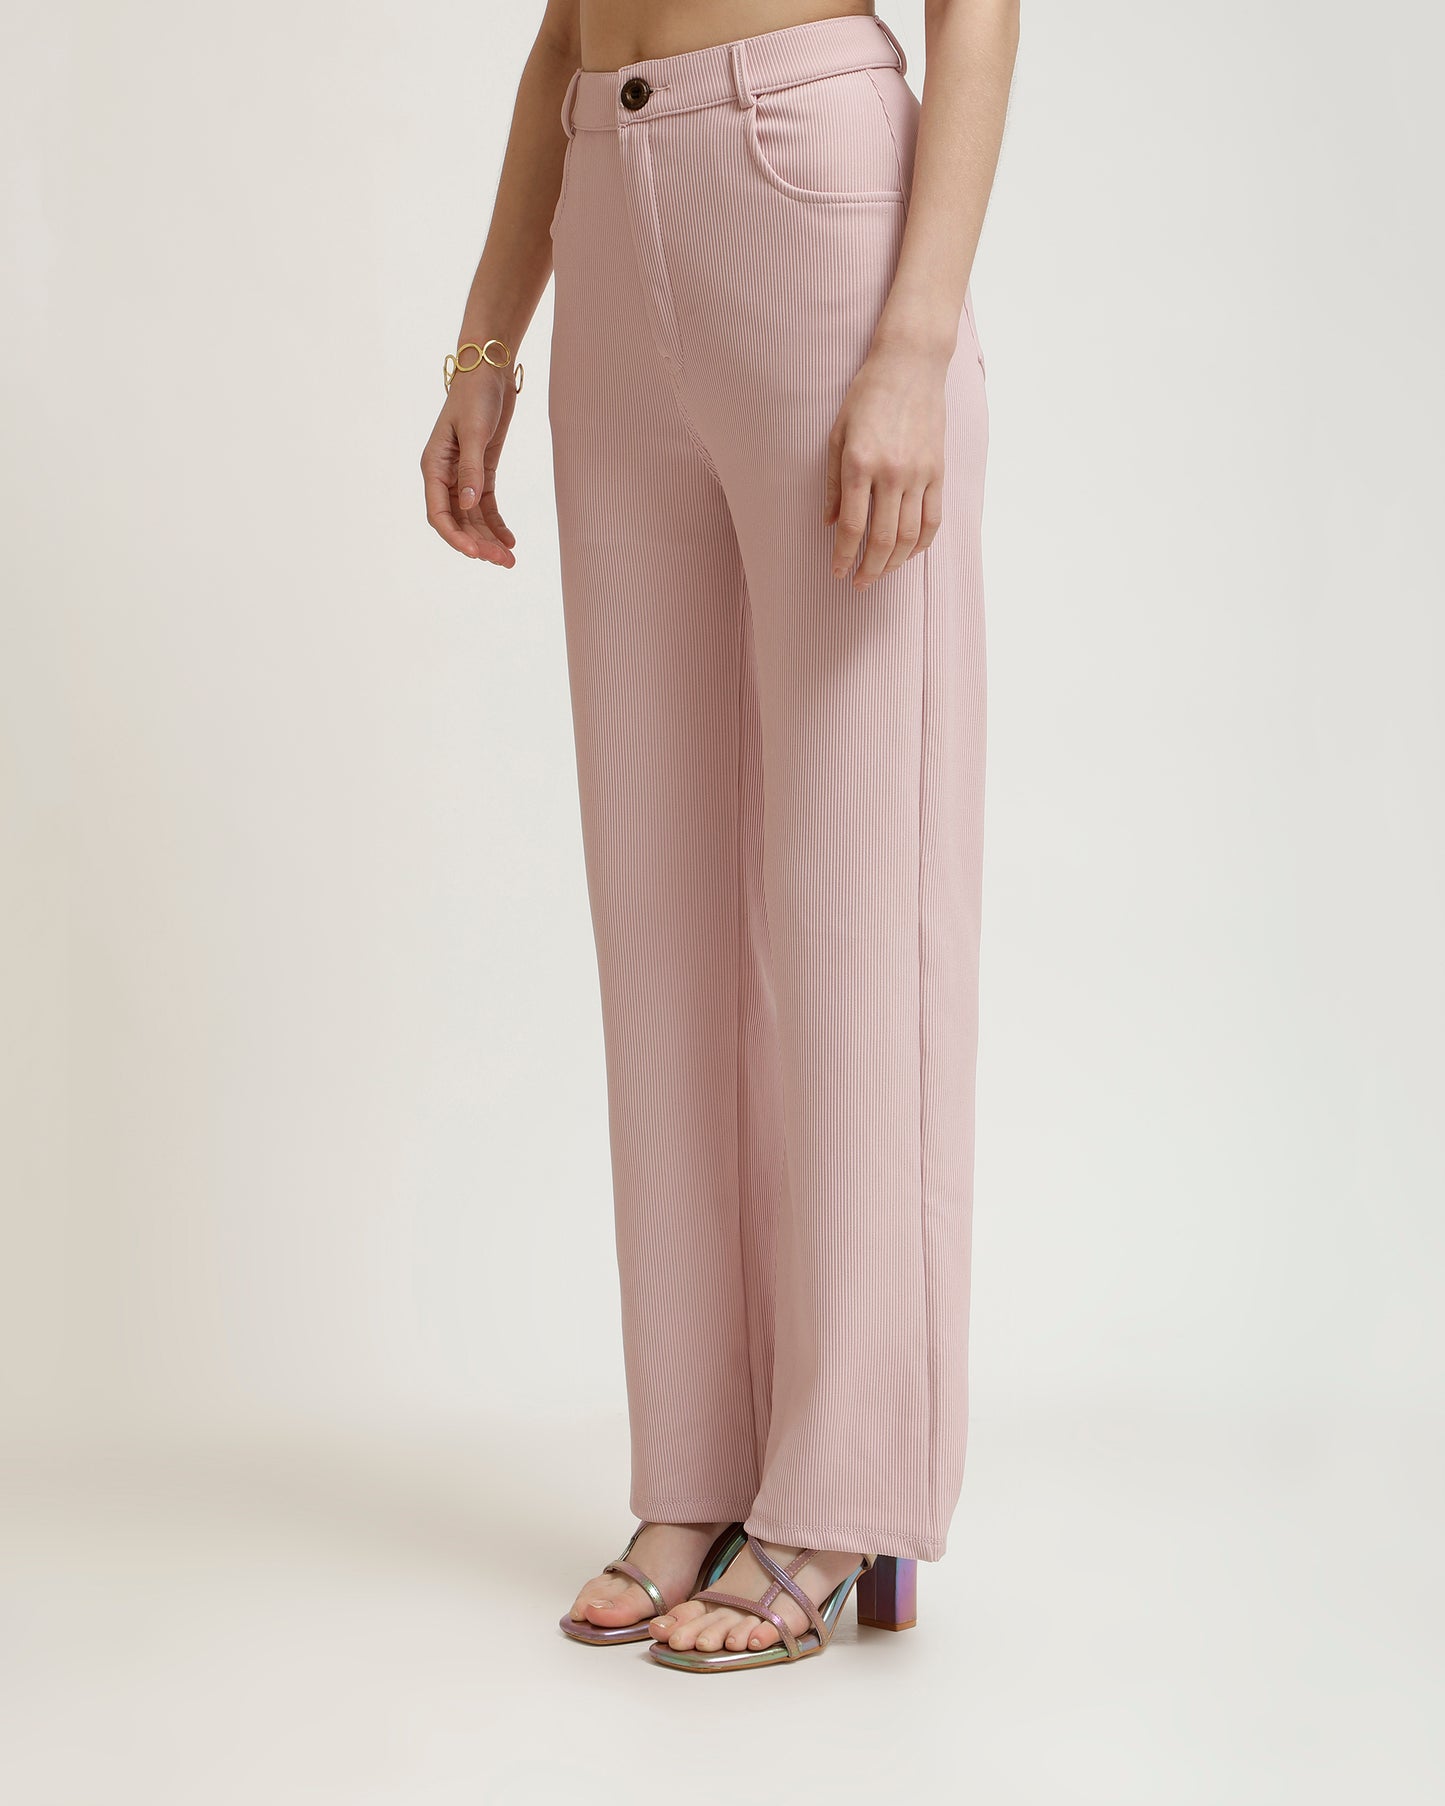 RIBBED TROUSERS,bottomwear, formal, full length, high waist, pastel pink, ribbed, straight fit, trousers,ribbed-trousers-pastelpink,Length - Full Length (41 Inches) Waist - High Waist Fit- Straight Fit Color - Pastel PinkNo. of Pockets - 4 Closure - Zip &amp; Buttons